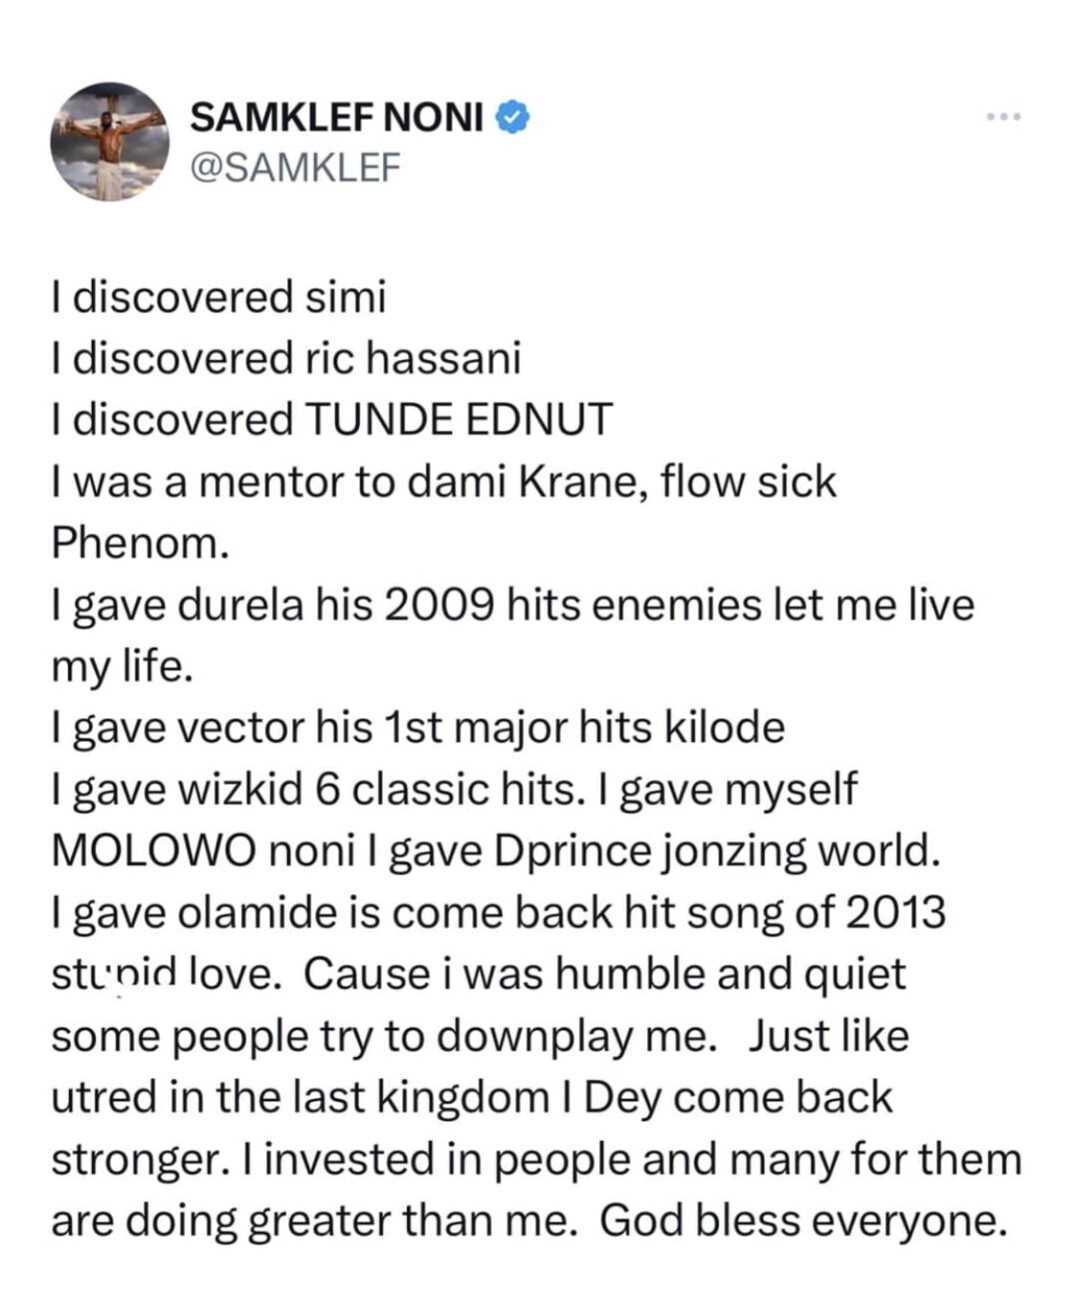 SamKlef reflects on artists he’s helped become famous.